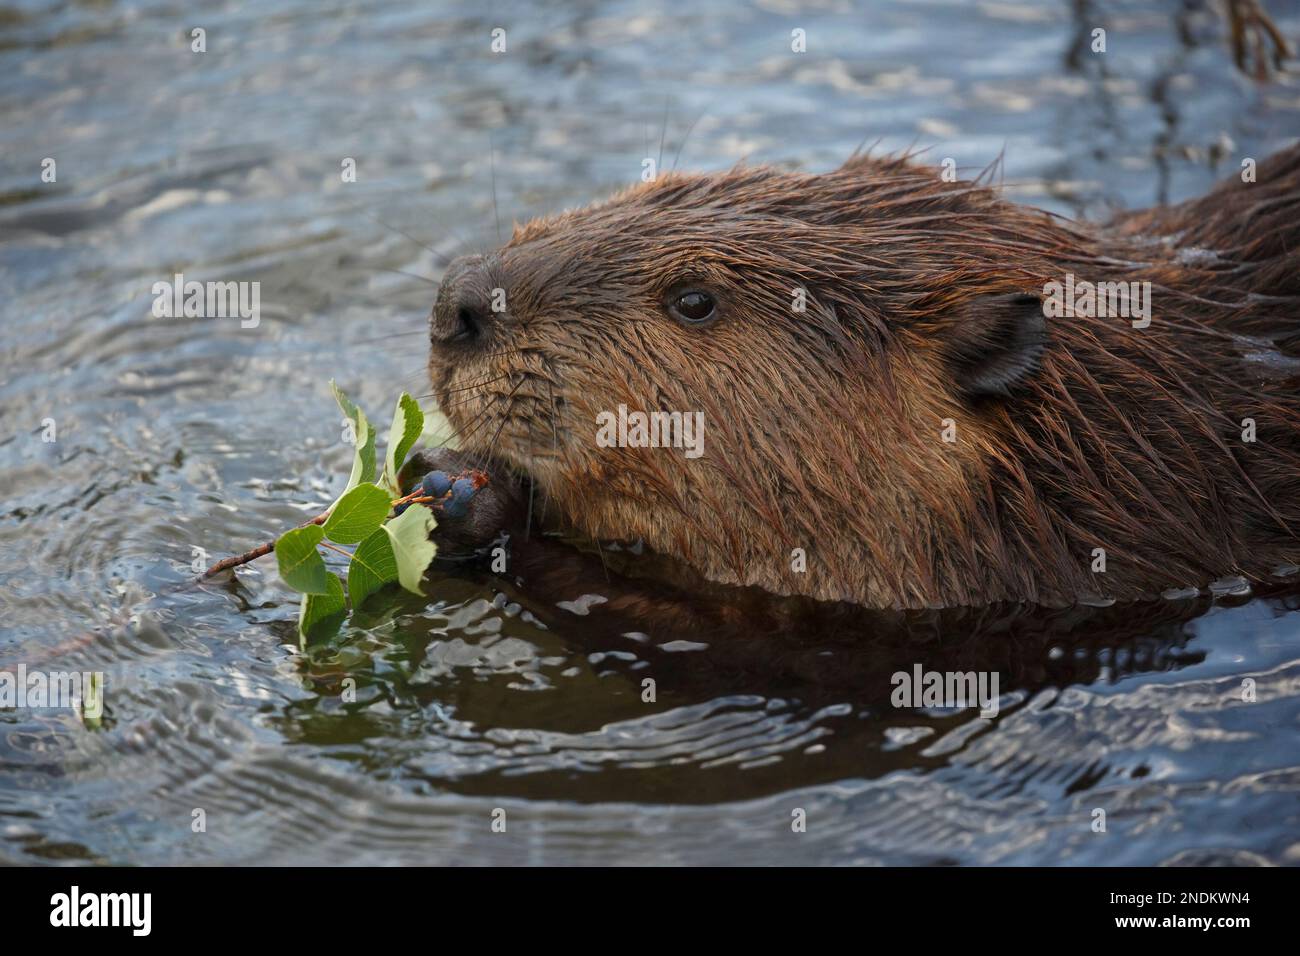 North American beaver (Castor canadensis) eating Saskatoon berries and leaves (Amelanchier alnifolia) in a pond, Alberta, Canada. Stock Photo